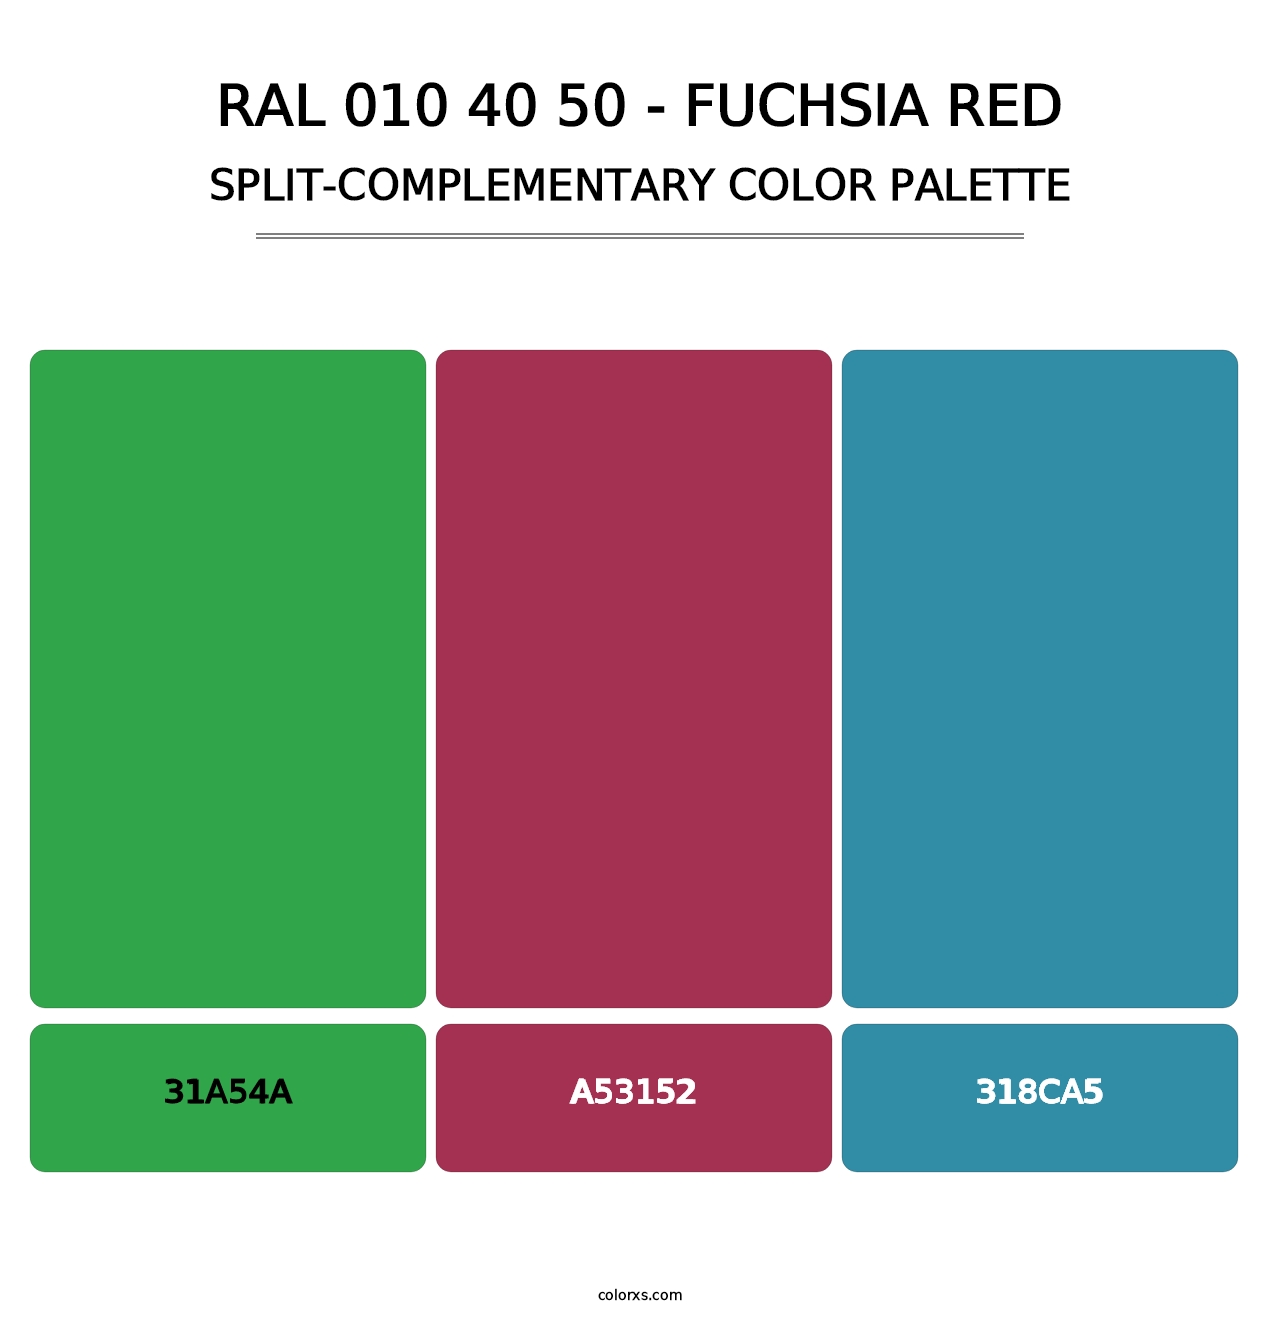 RAL 010 40 50 - Fuchsia Red - Split-Complementary Color Palette